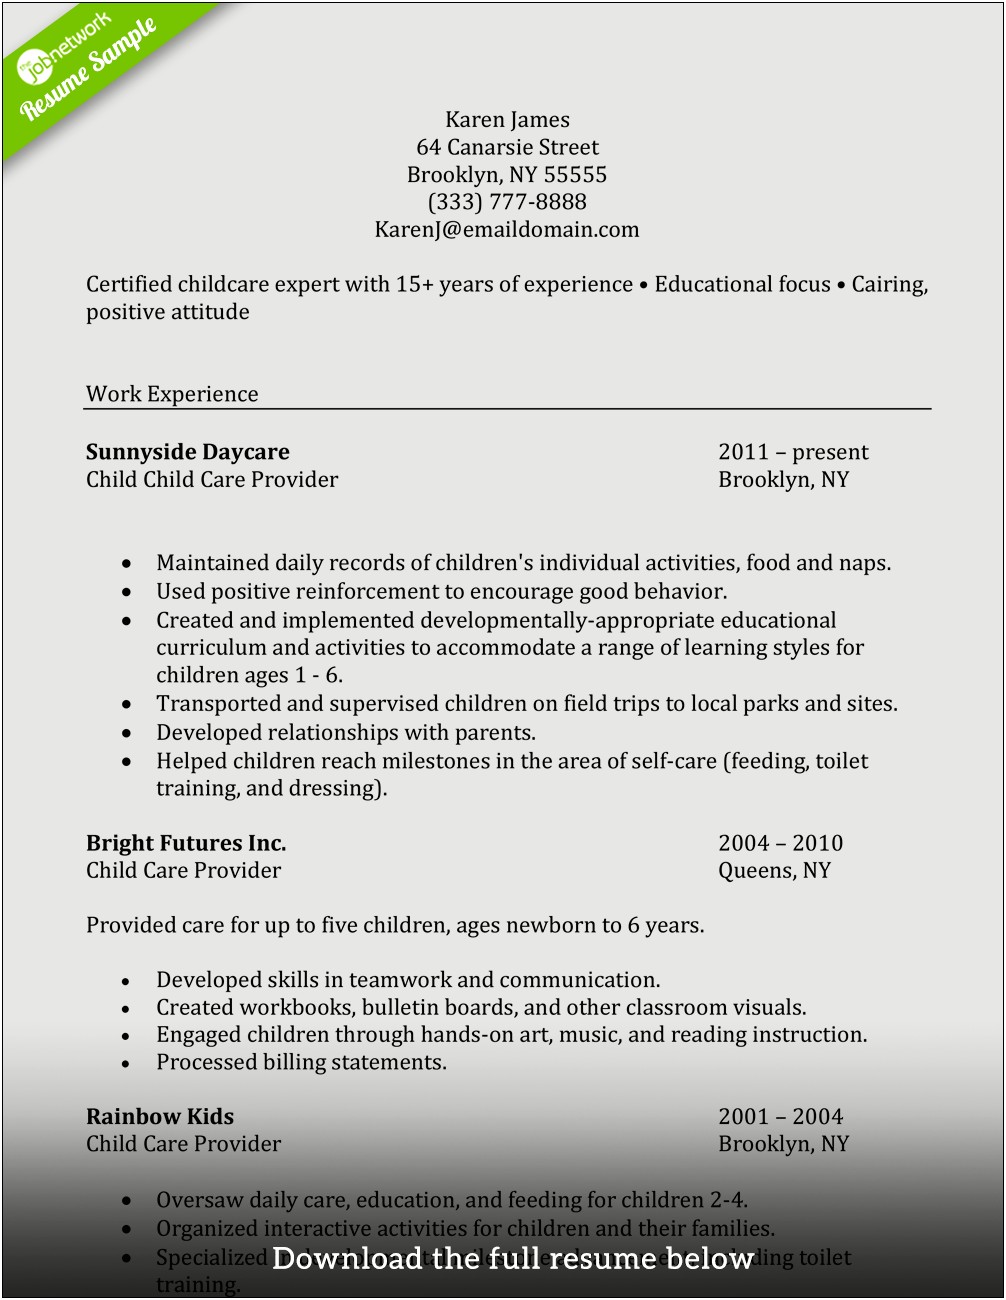 Examples Of Resumes For Daycare Workers